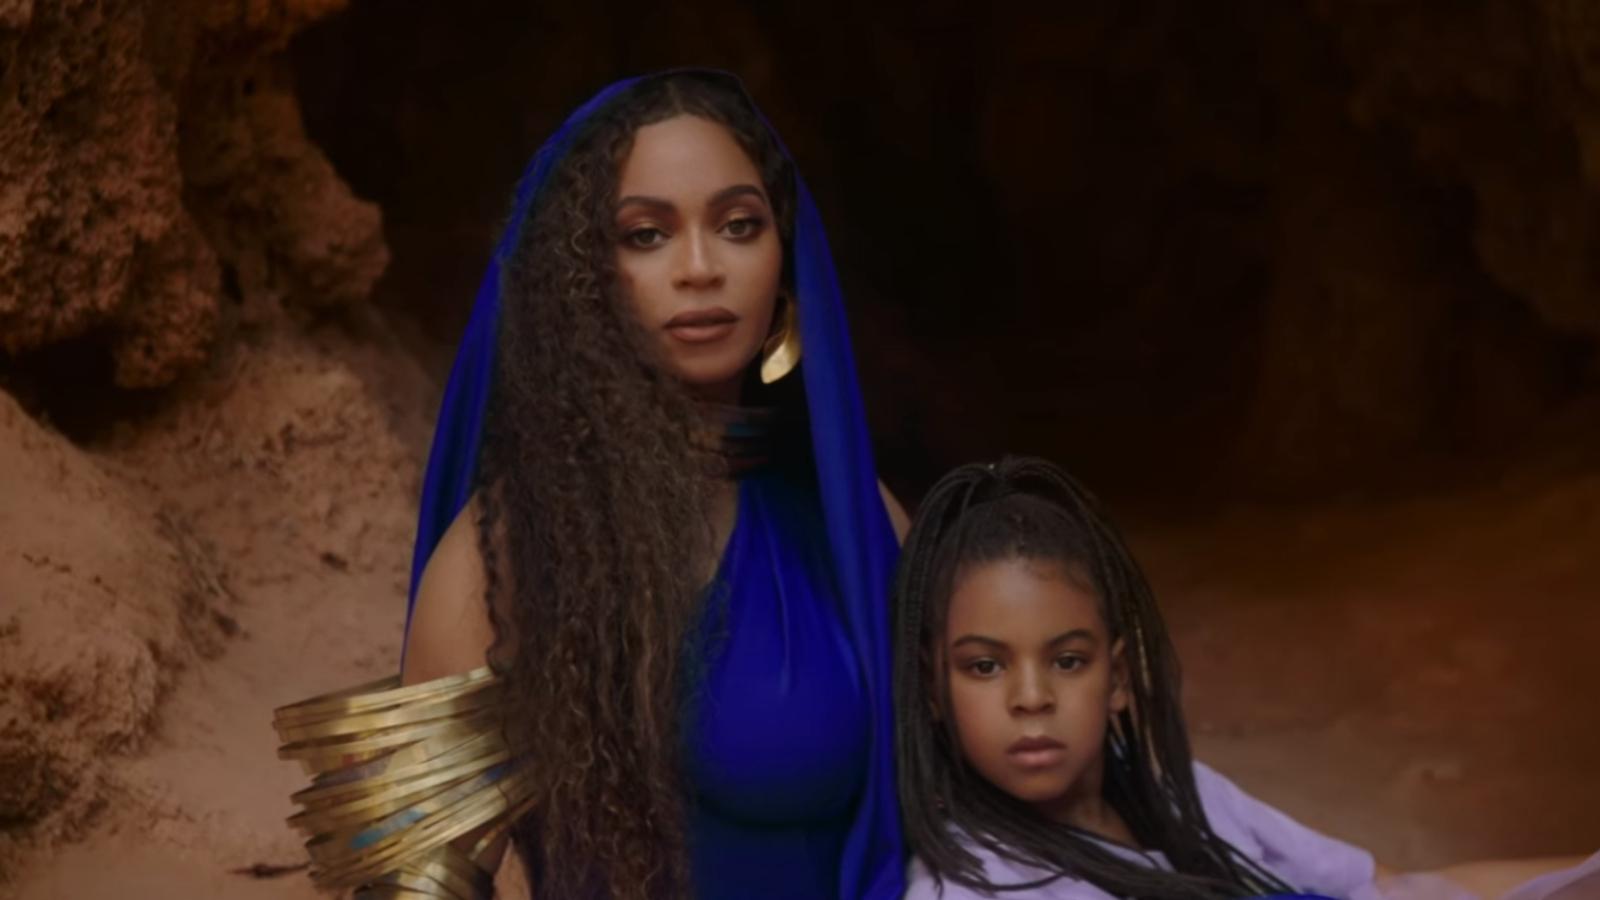 Beyonce and Blue Ivy's 'Brown Skin Girl' anthem sparks Twitter challenge